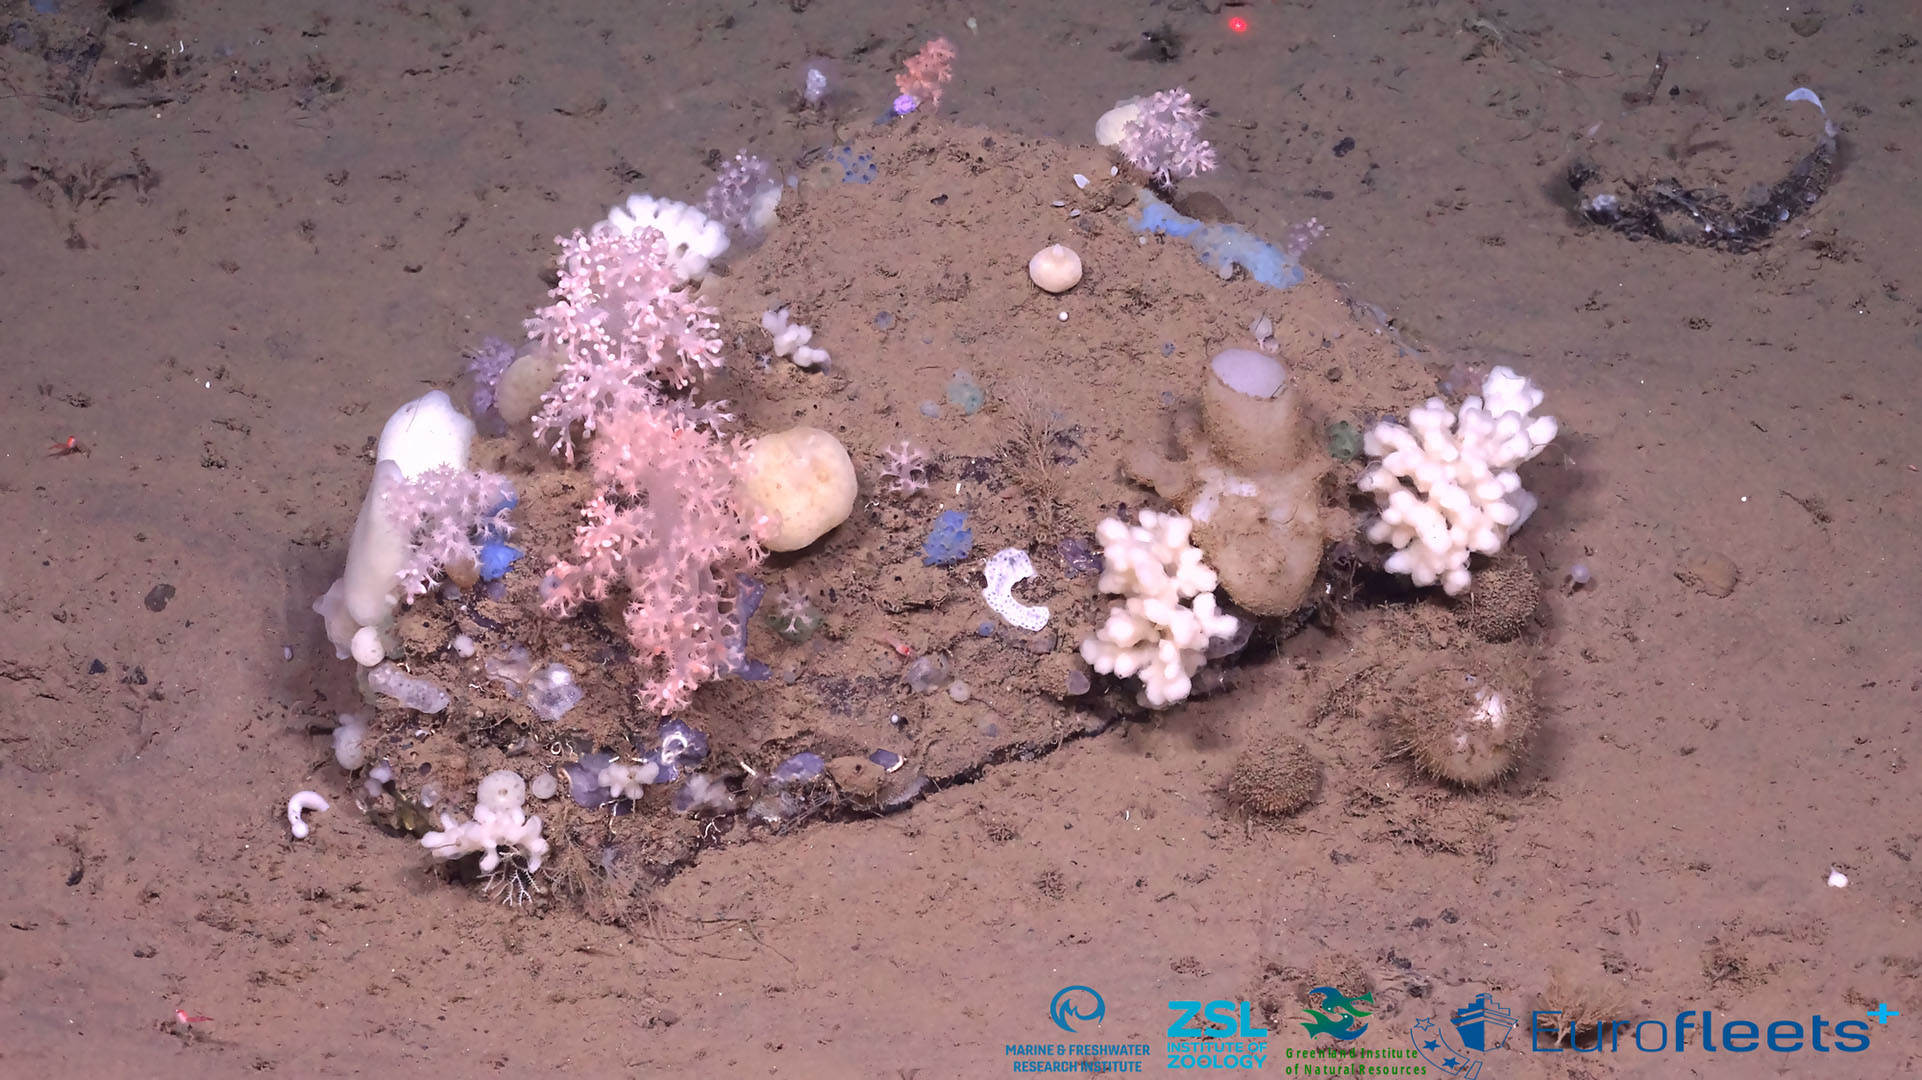 Coral and sponge habitat in East Greenland deep-seabed